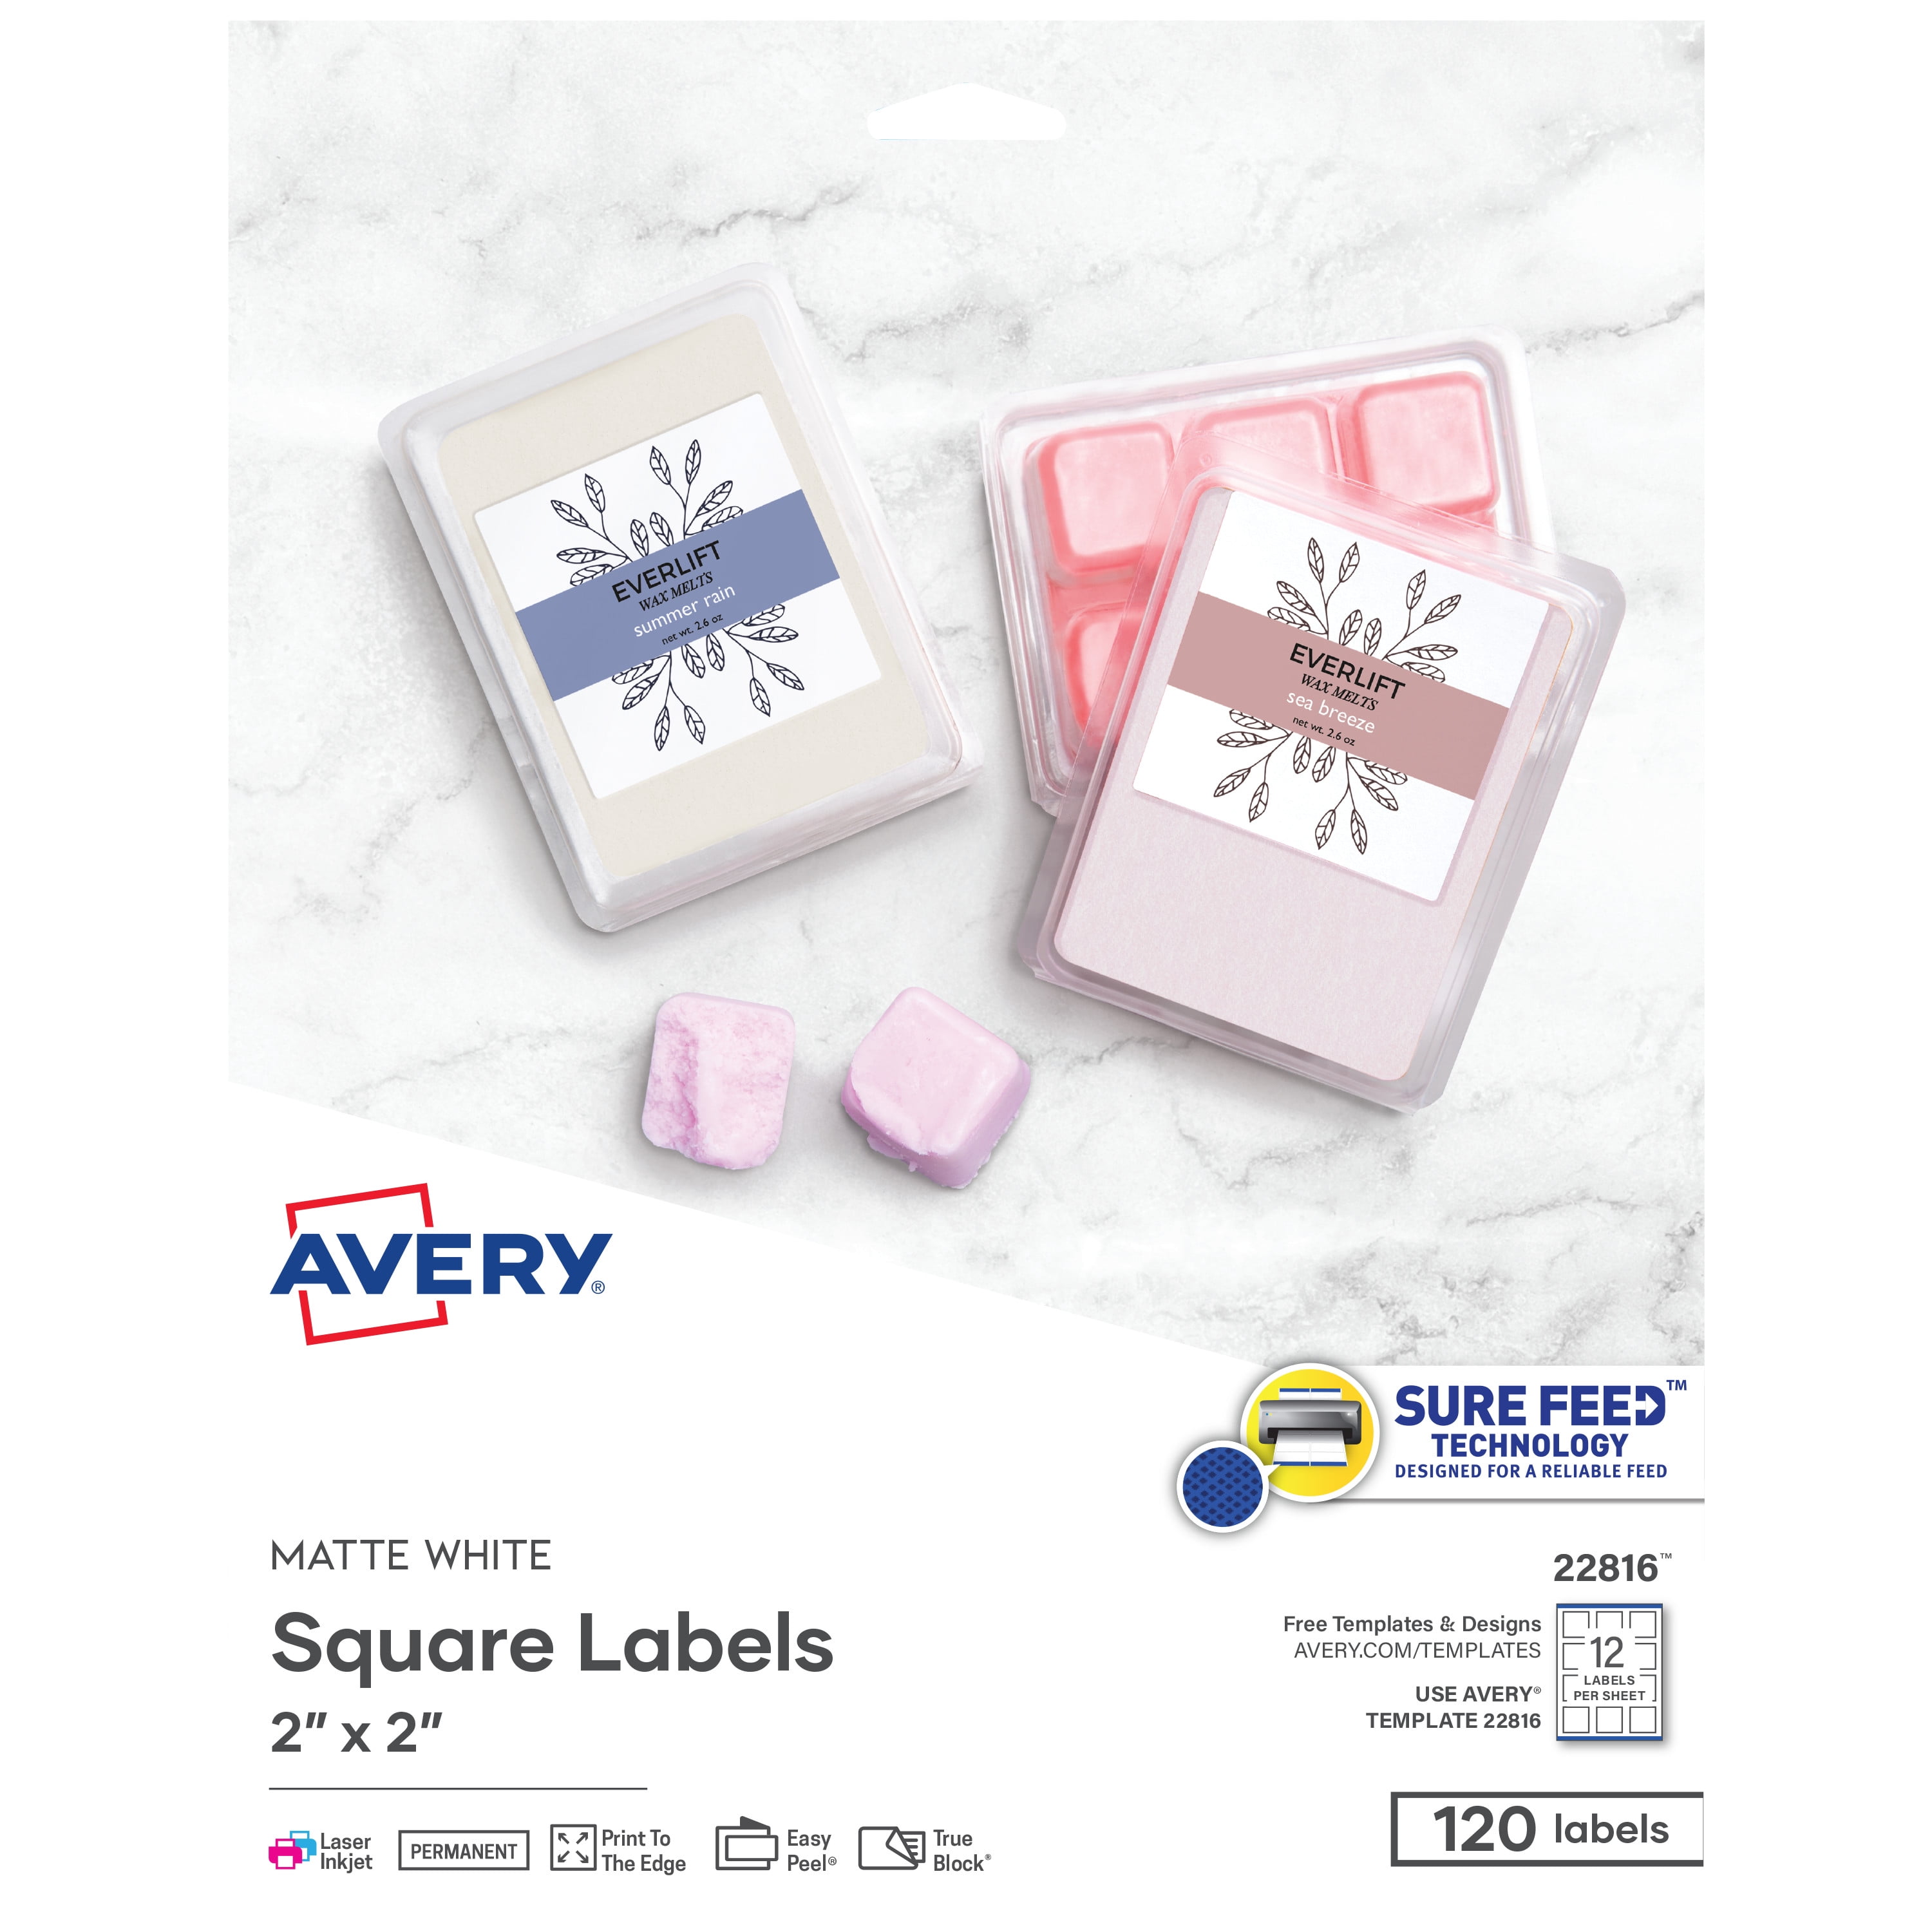 Avery Square Labels, White, 2" x 2", Sure Feed, Laser, Inkjet, 120 Labels (22816)